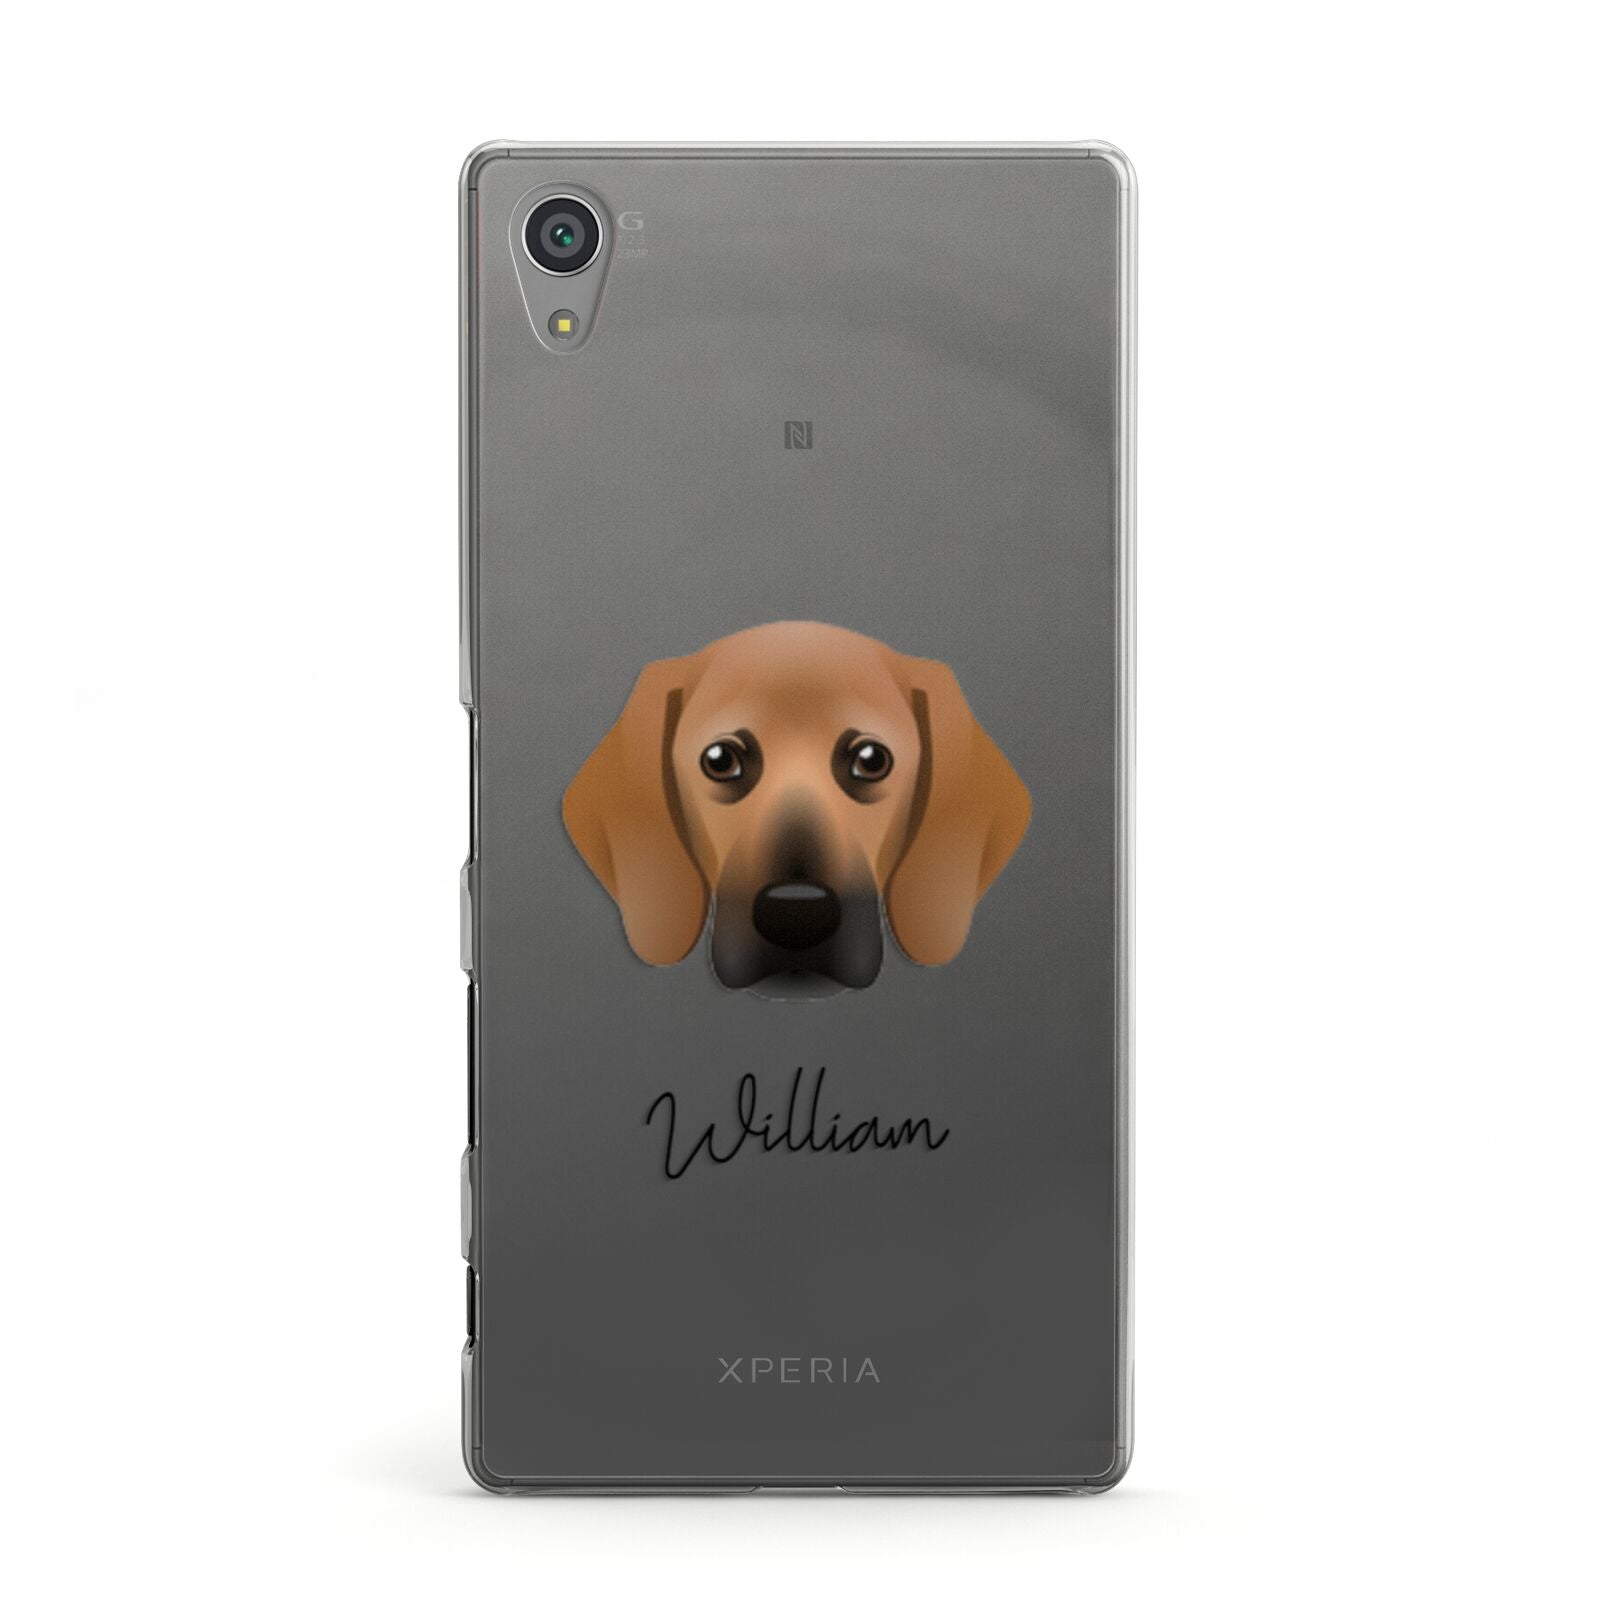 Bassugg Personalised Sony Xperia Case